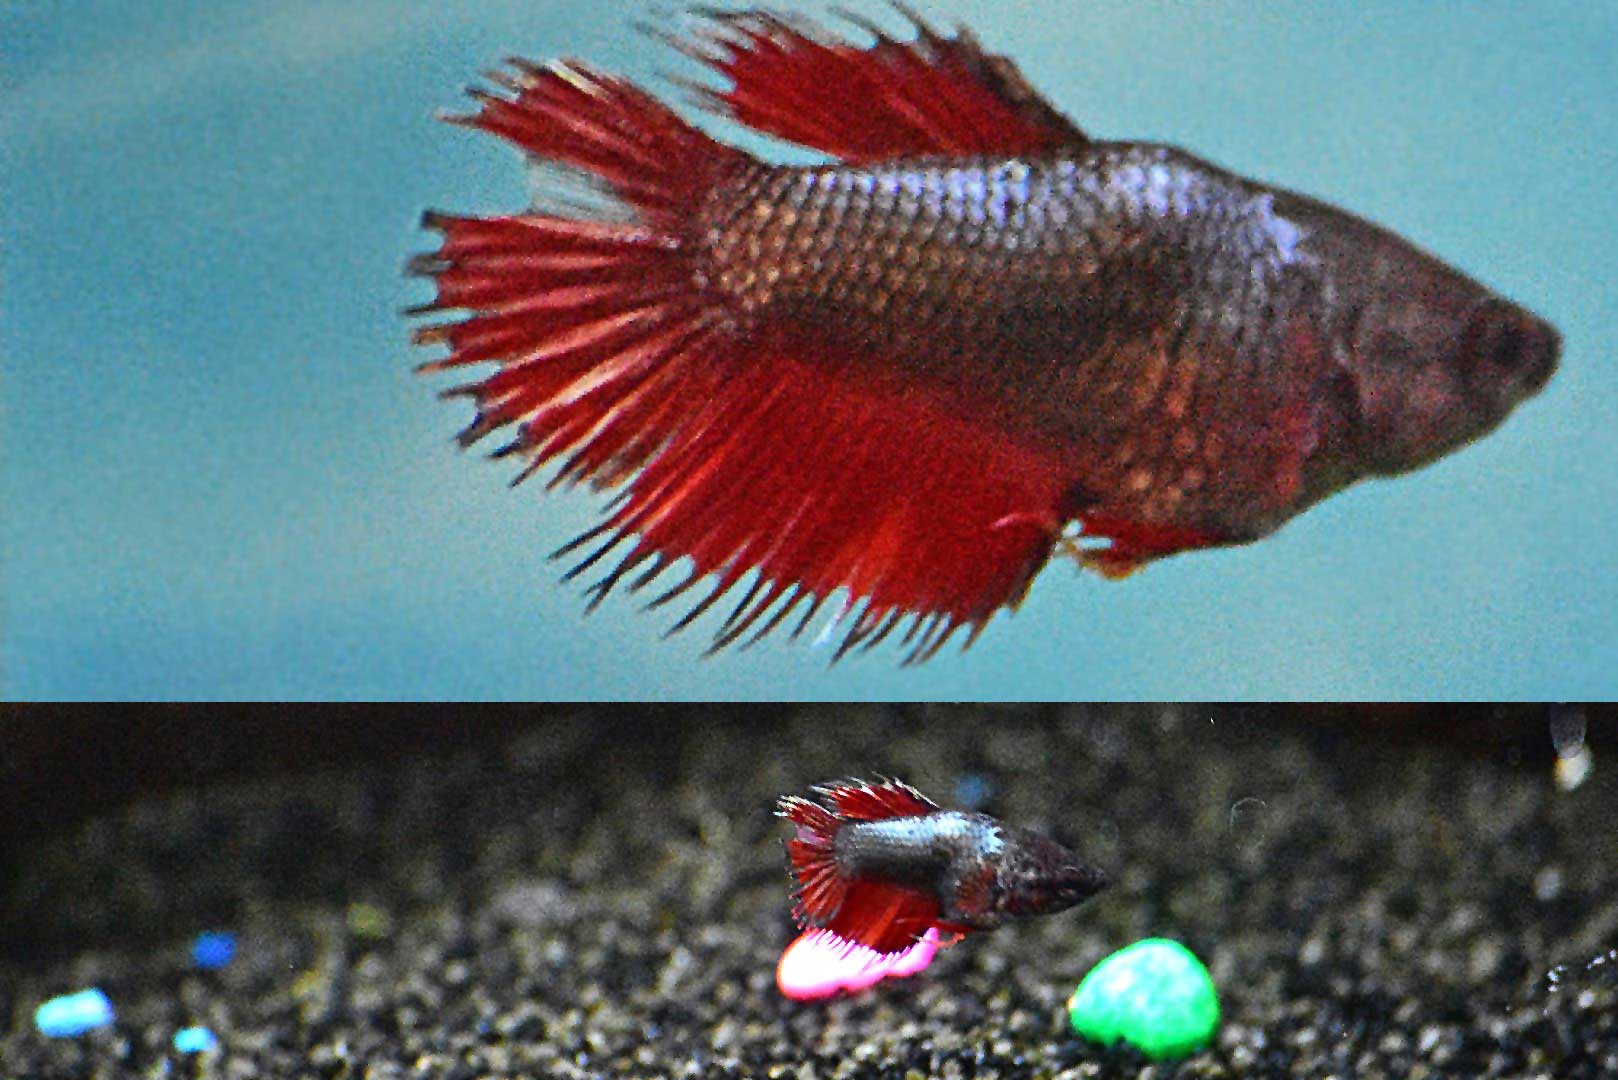 Betta fish are native to Asia, where they live in the shallow water of marshes, ponds, or slow-moving streams. Wayne's AquaWorld